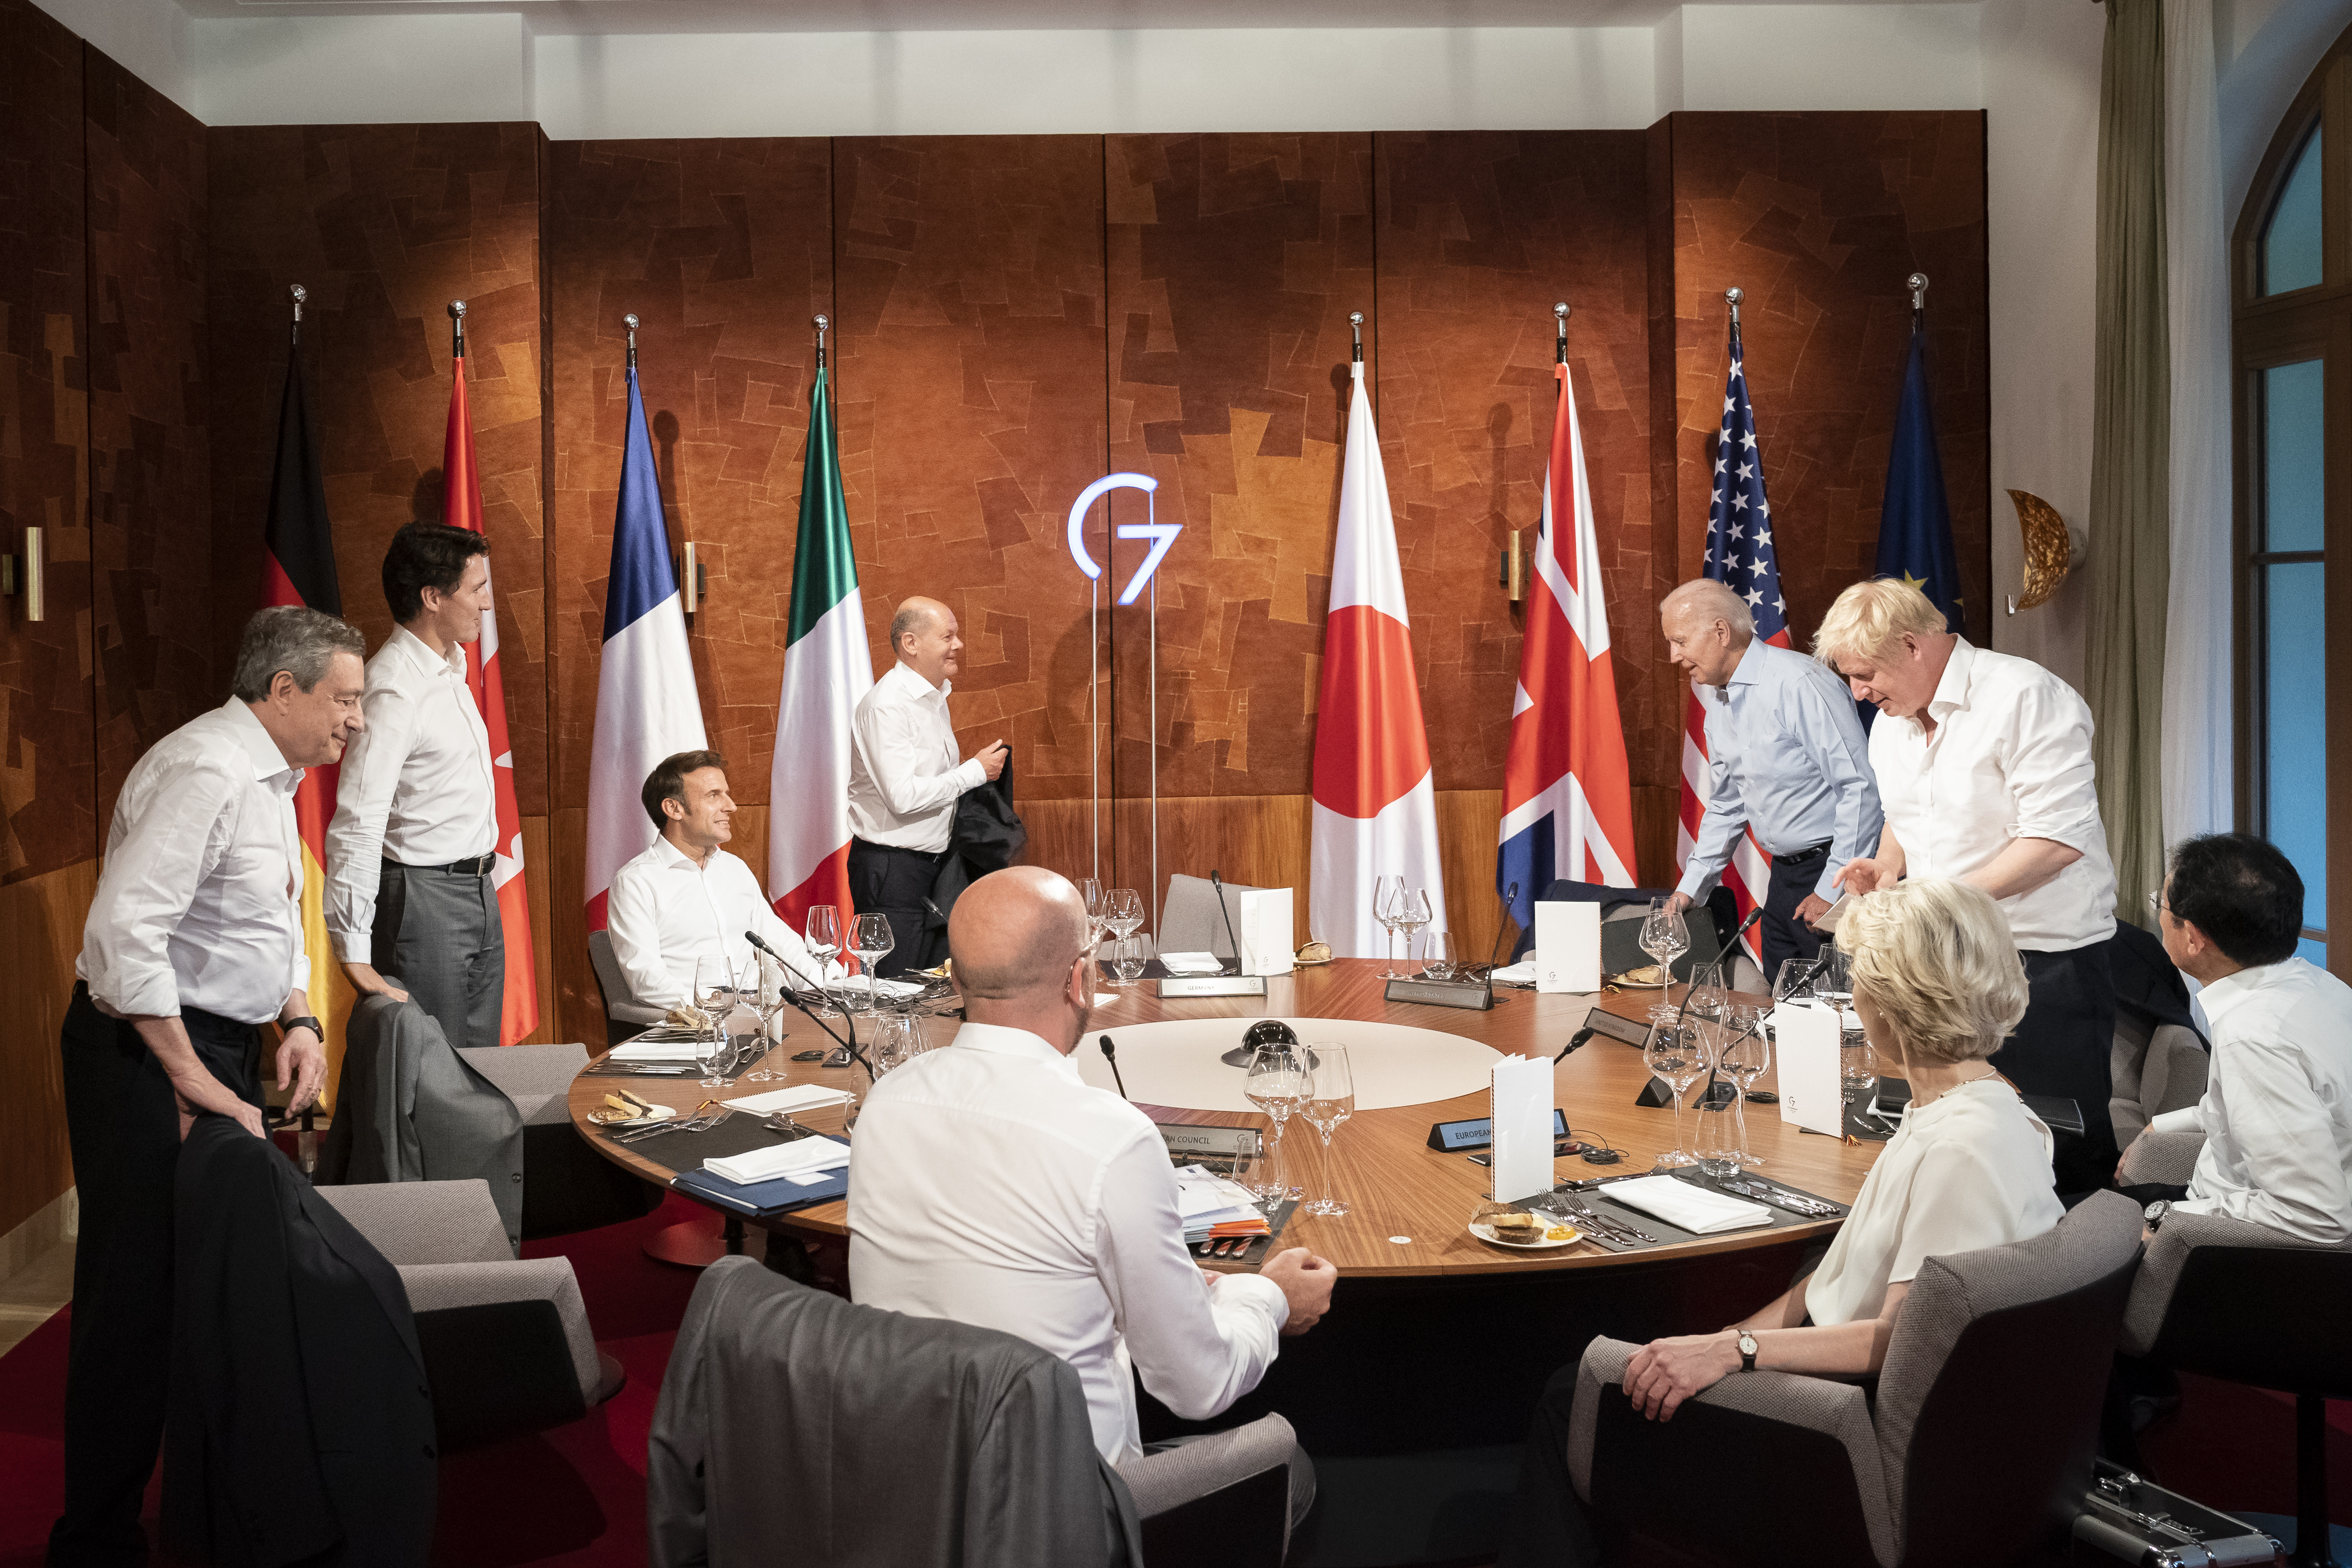 G7 group photo during the third working session